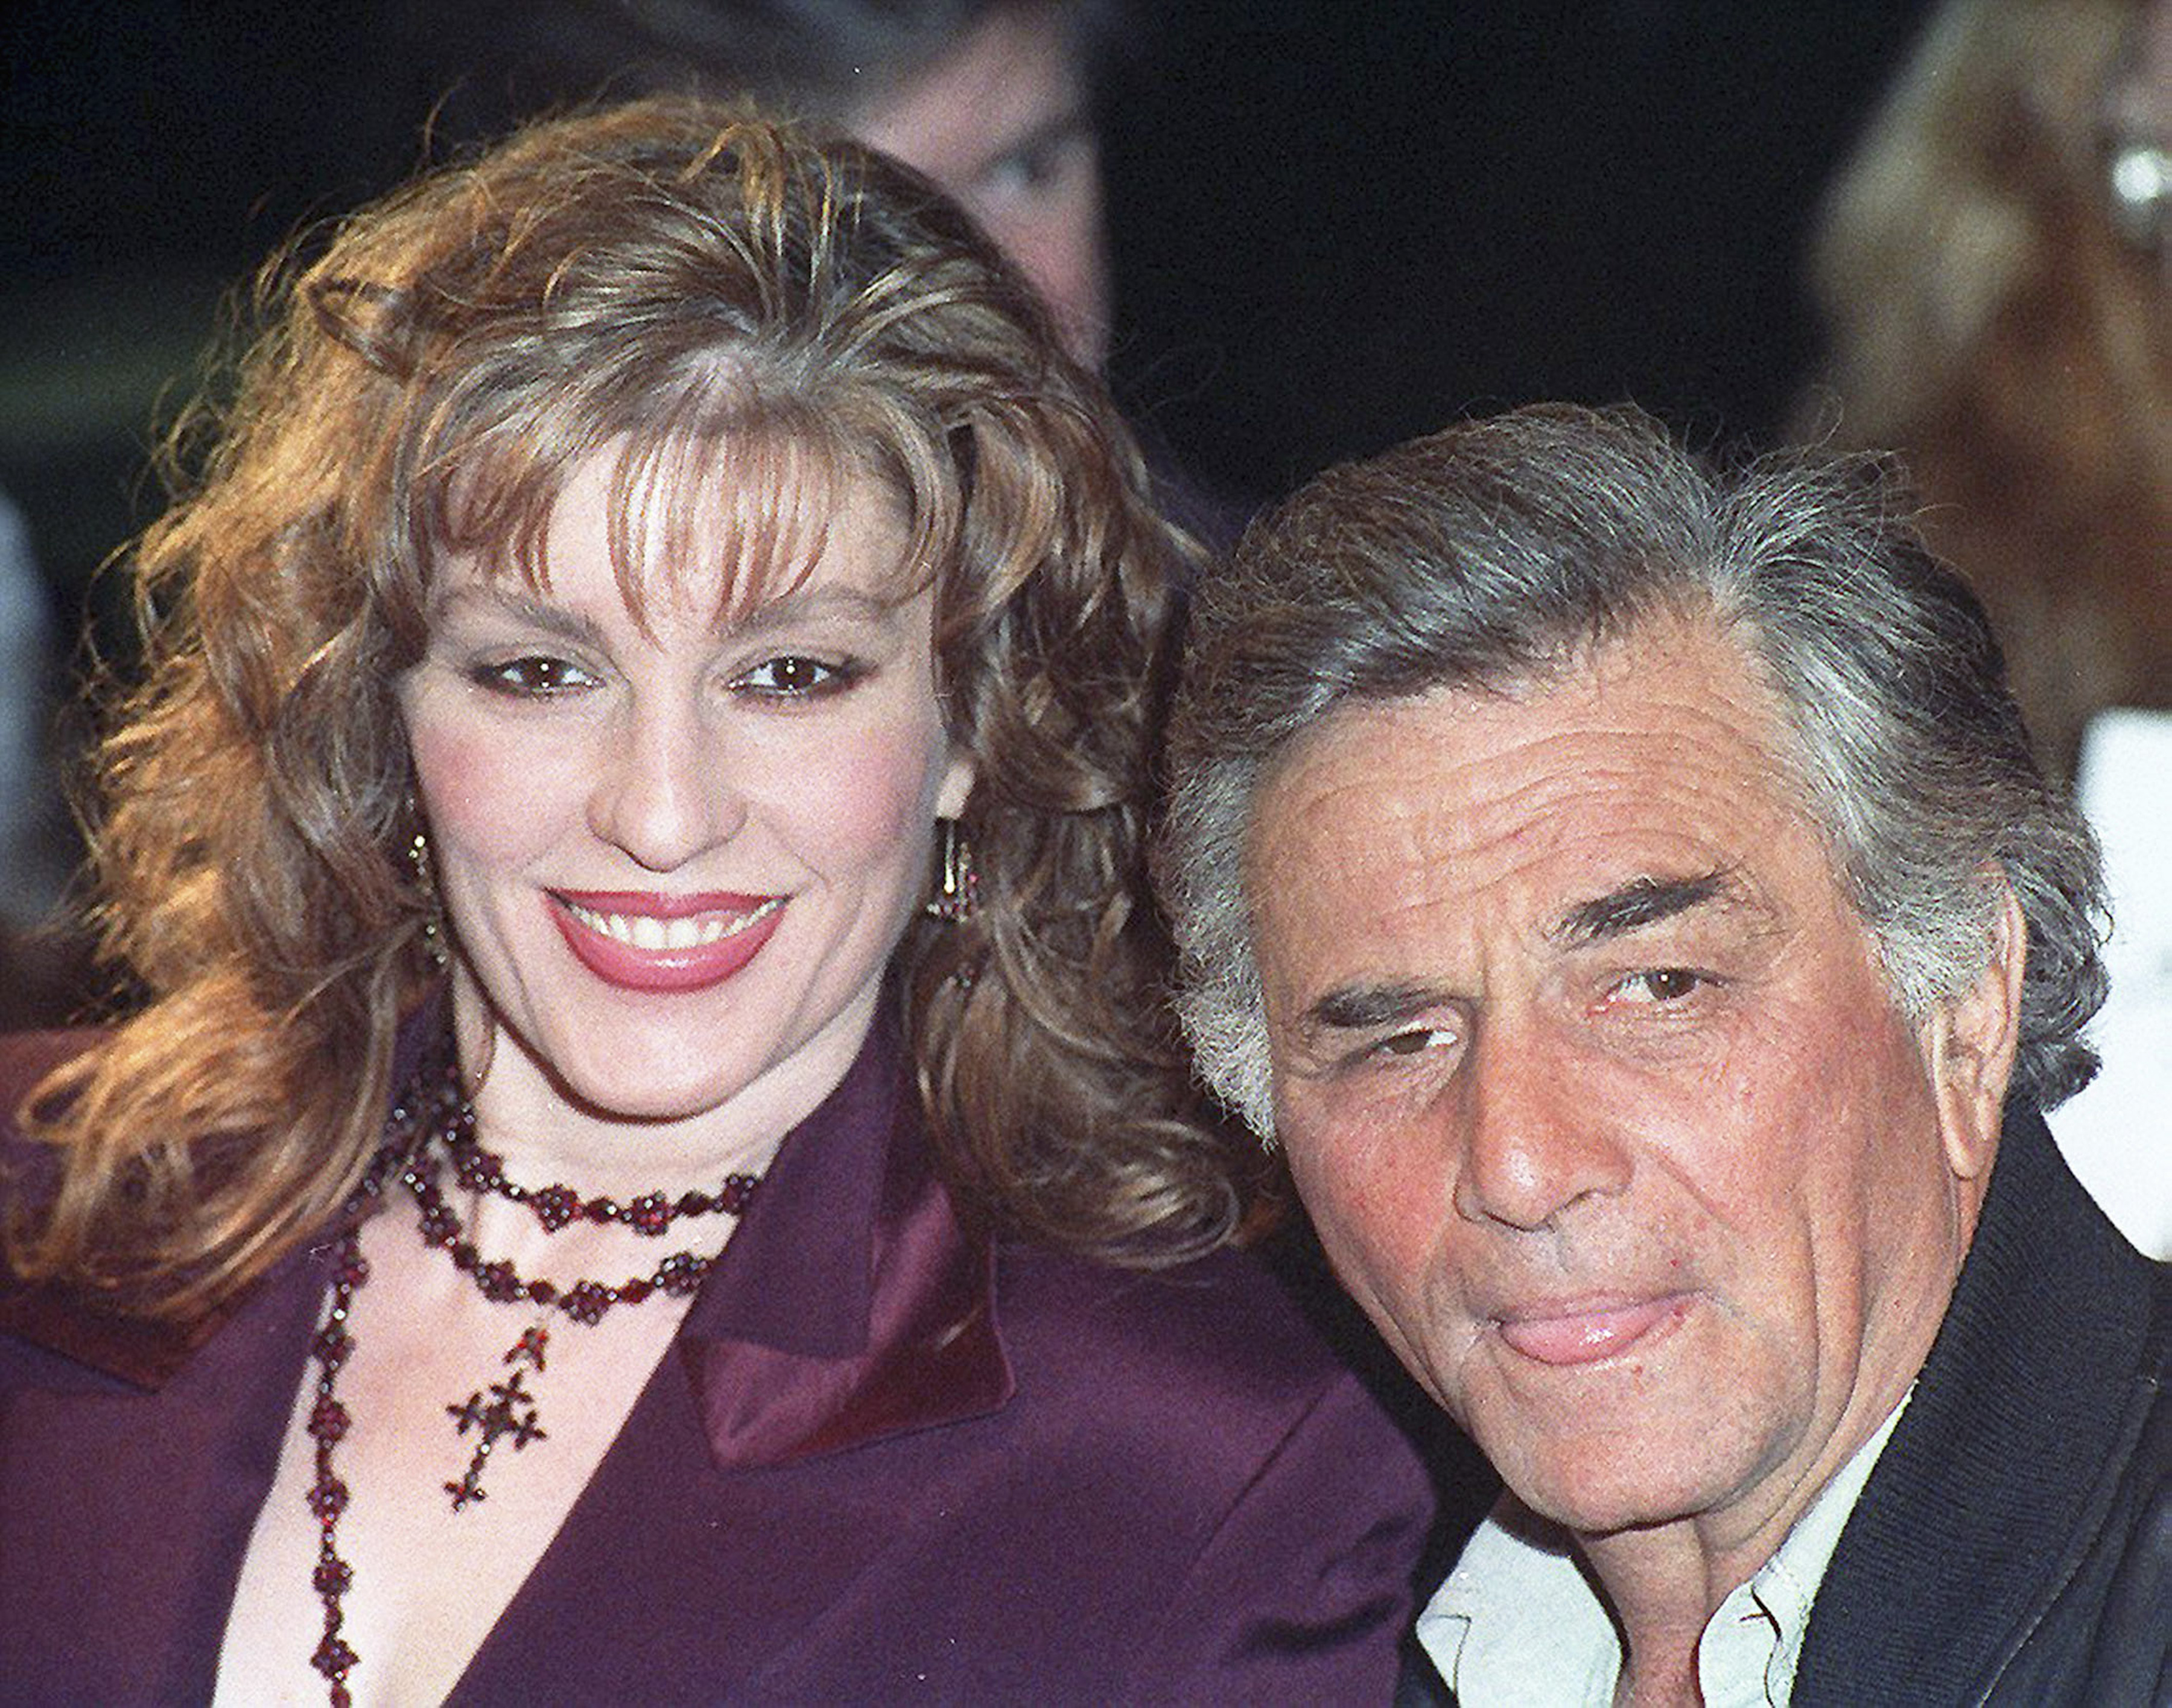 Shera Danese and Petere Falk at an industry event in 1991. | Source: Getty Images